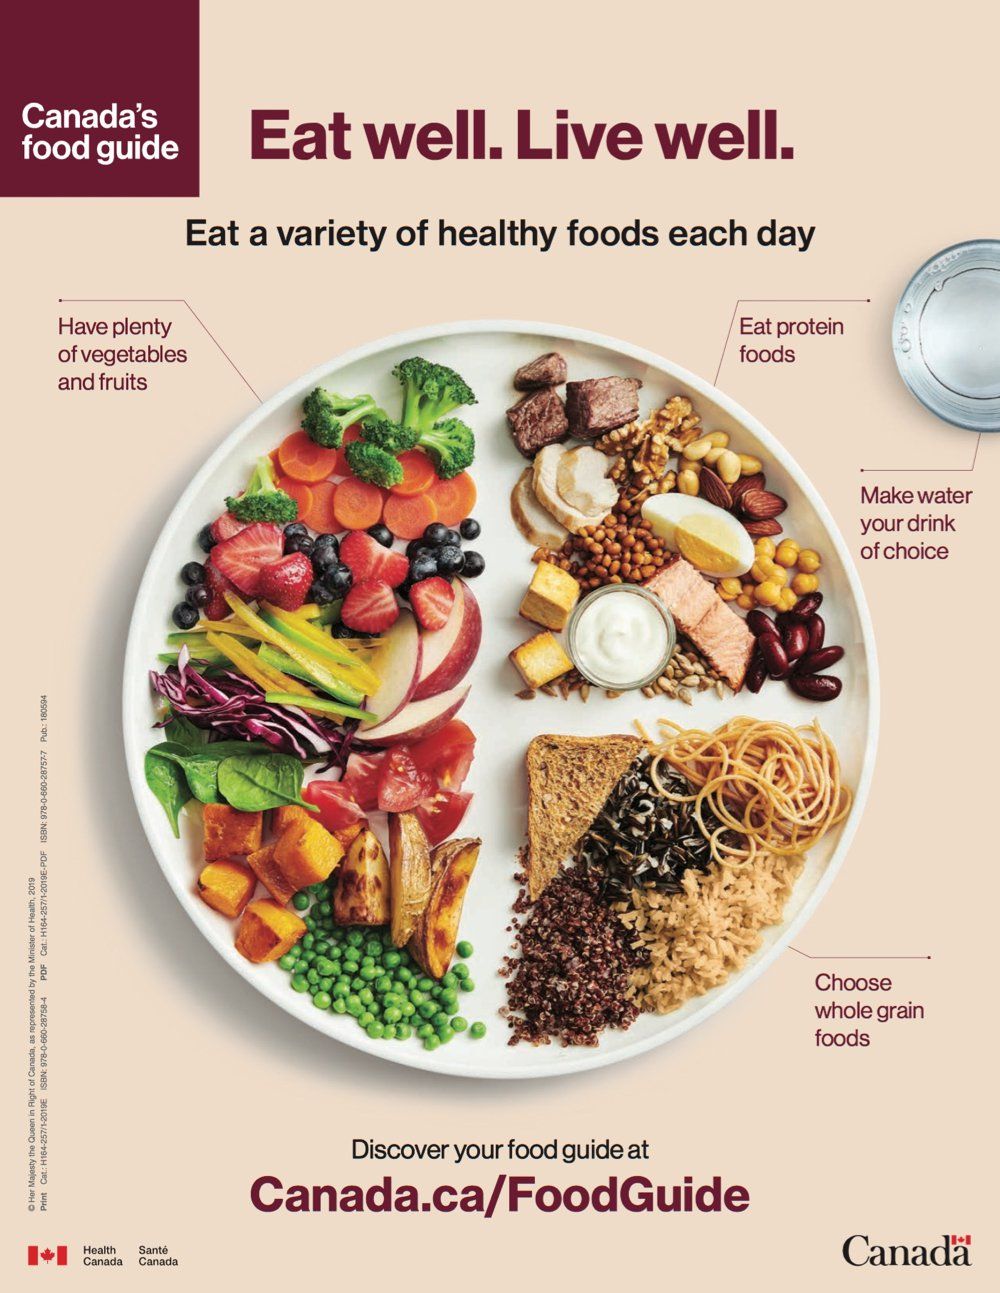 it is from Canada’s Food Guide in 2019, “It’s not about portion but about proportion,” Hutchinson explained, “and how to incorporate that into family meals, snacks, and gatherings. To make it real in your everyday life.